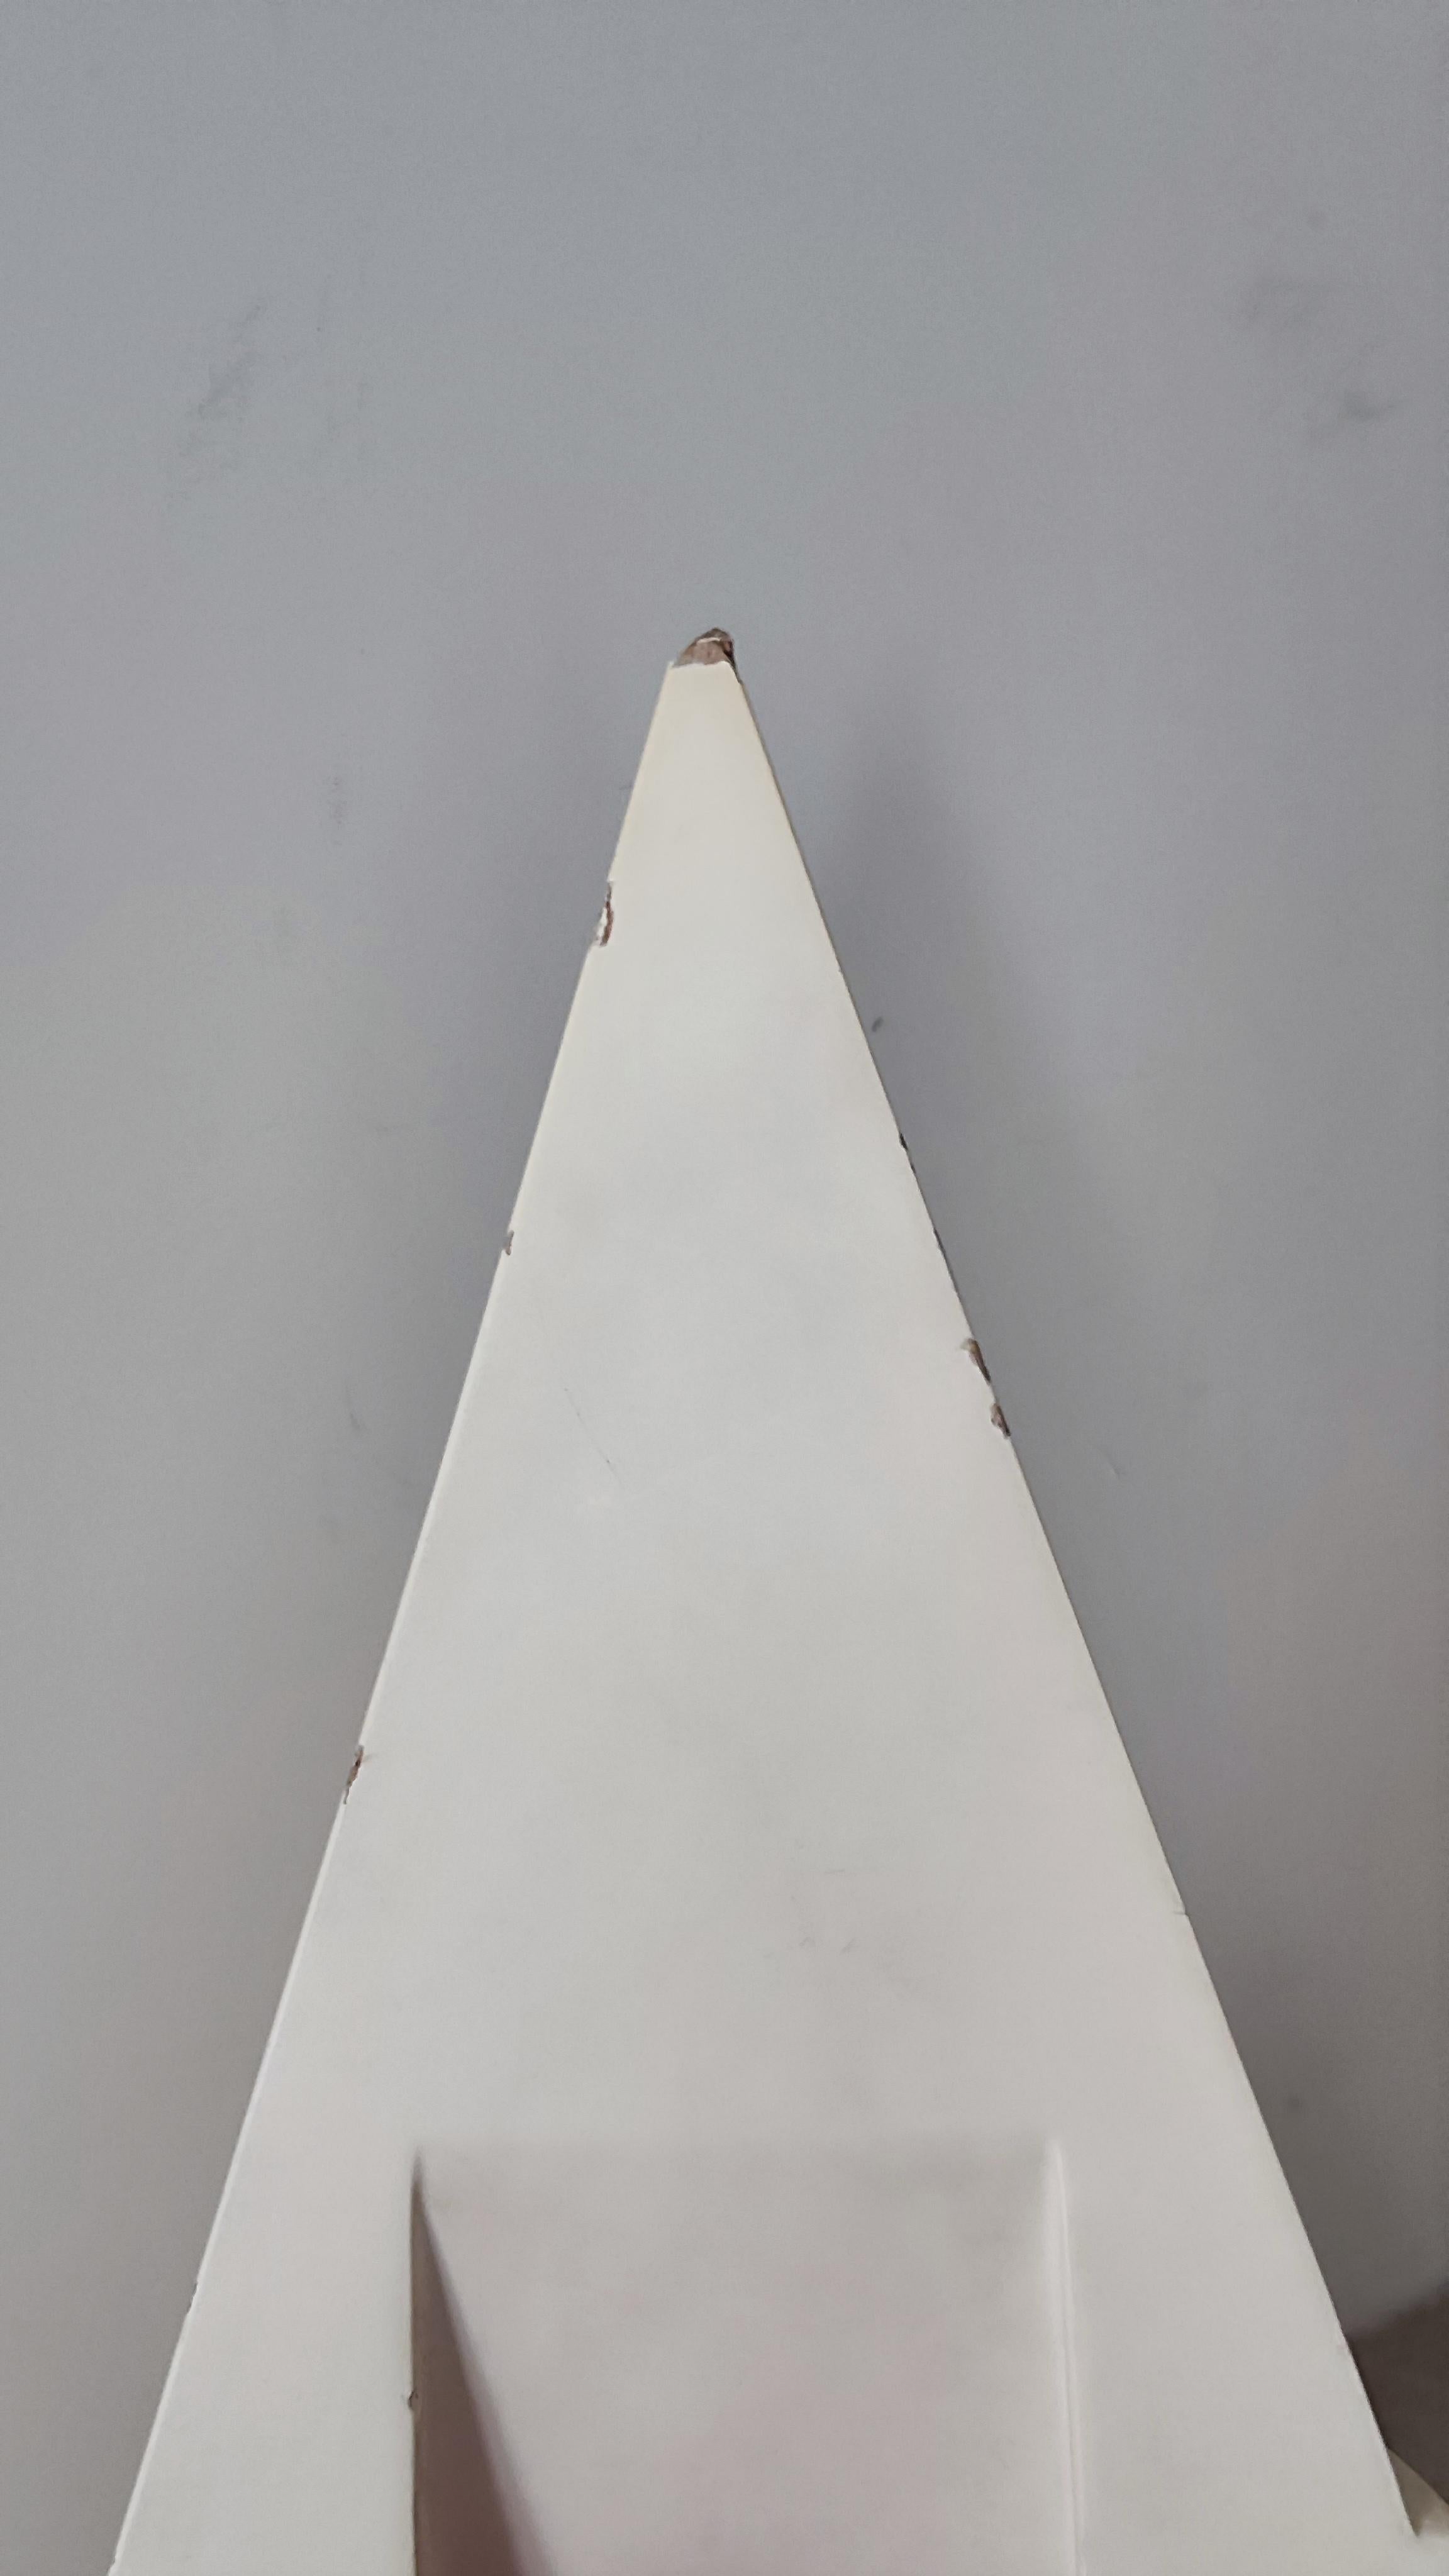 Abstract post modern polychrome pyramid sculpture Memphis 1980, wood - Signed  For Sale 13